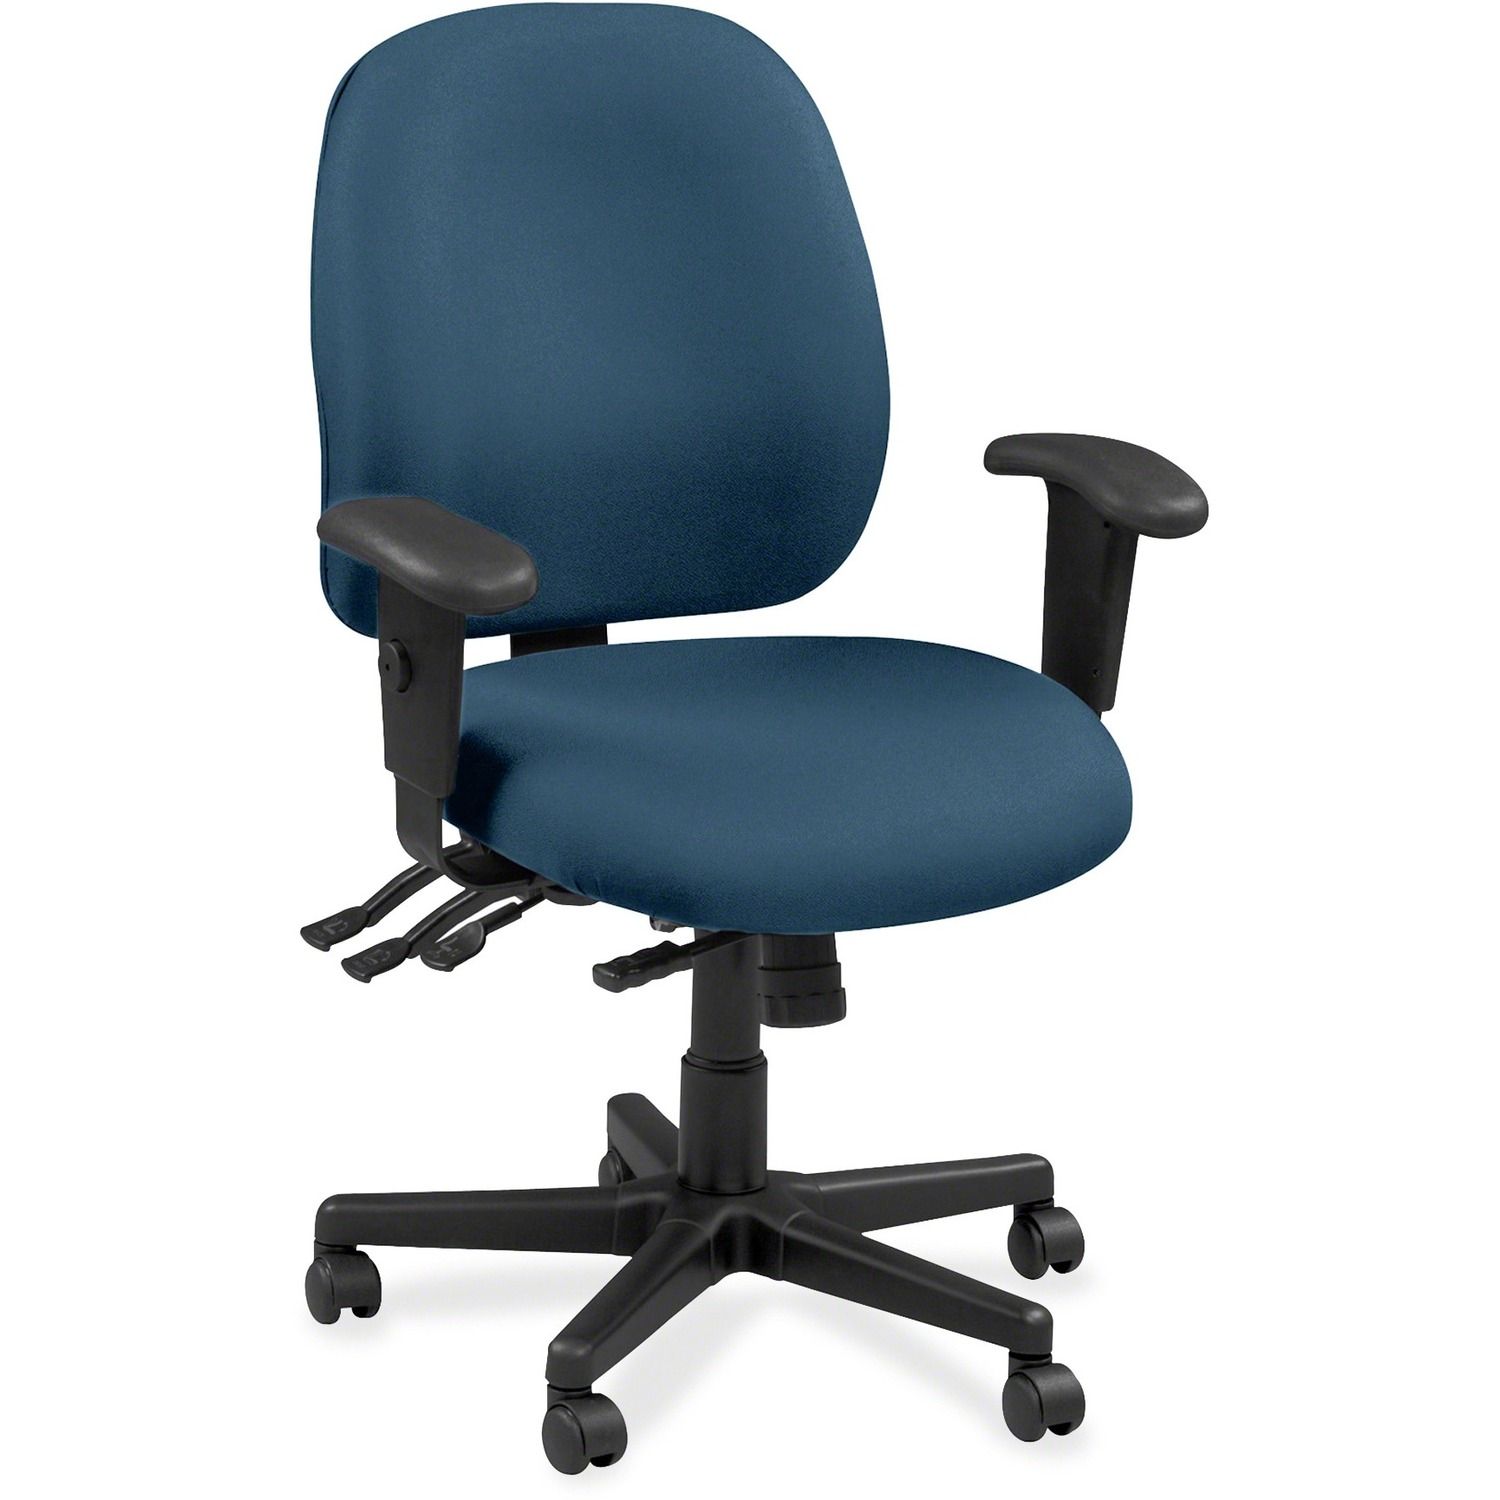 4x4 49802A Task Chair Graphite Leather Seat, Graphite Leather Back, 5-star Base, 1 Each